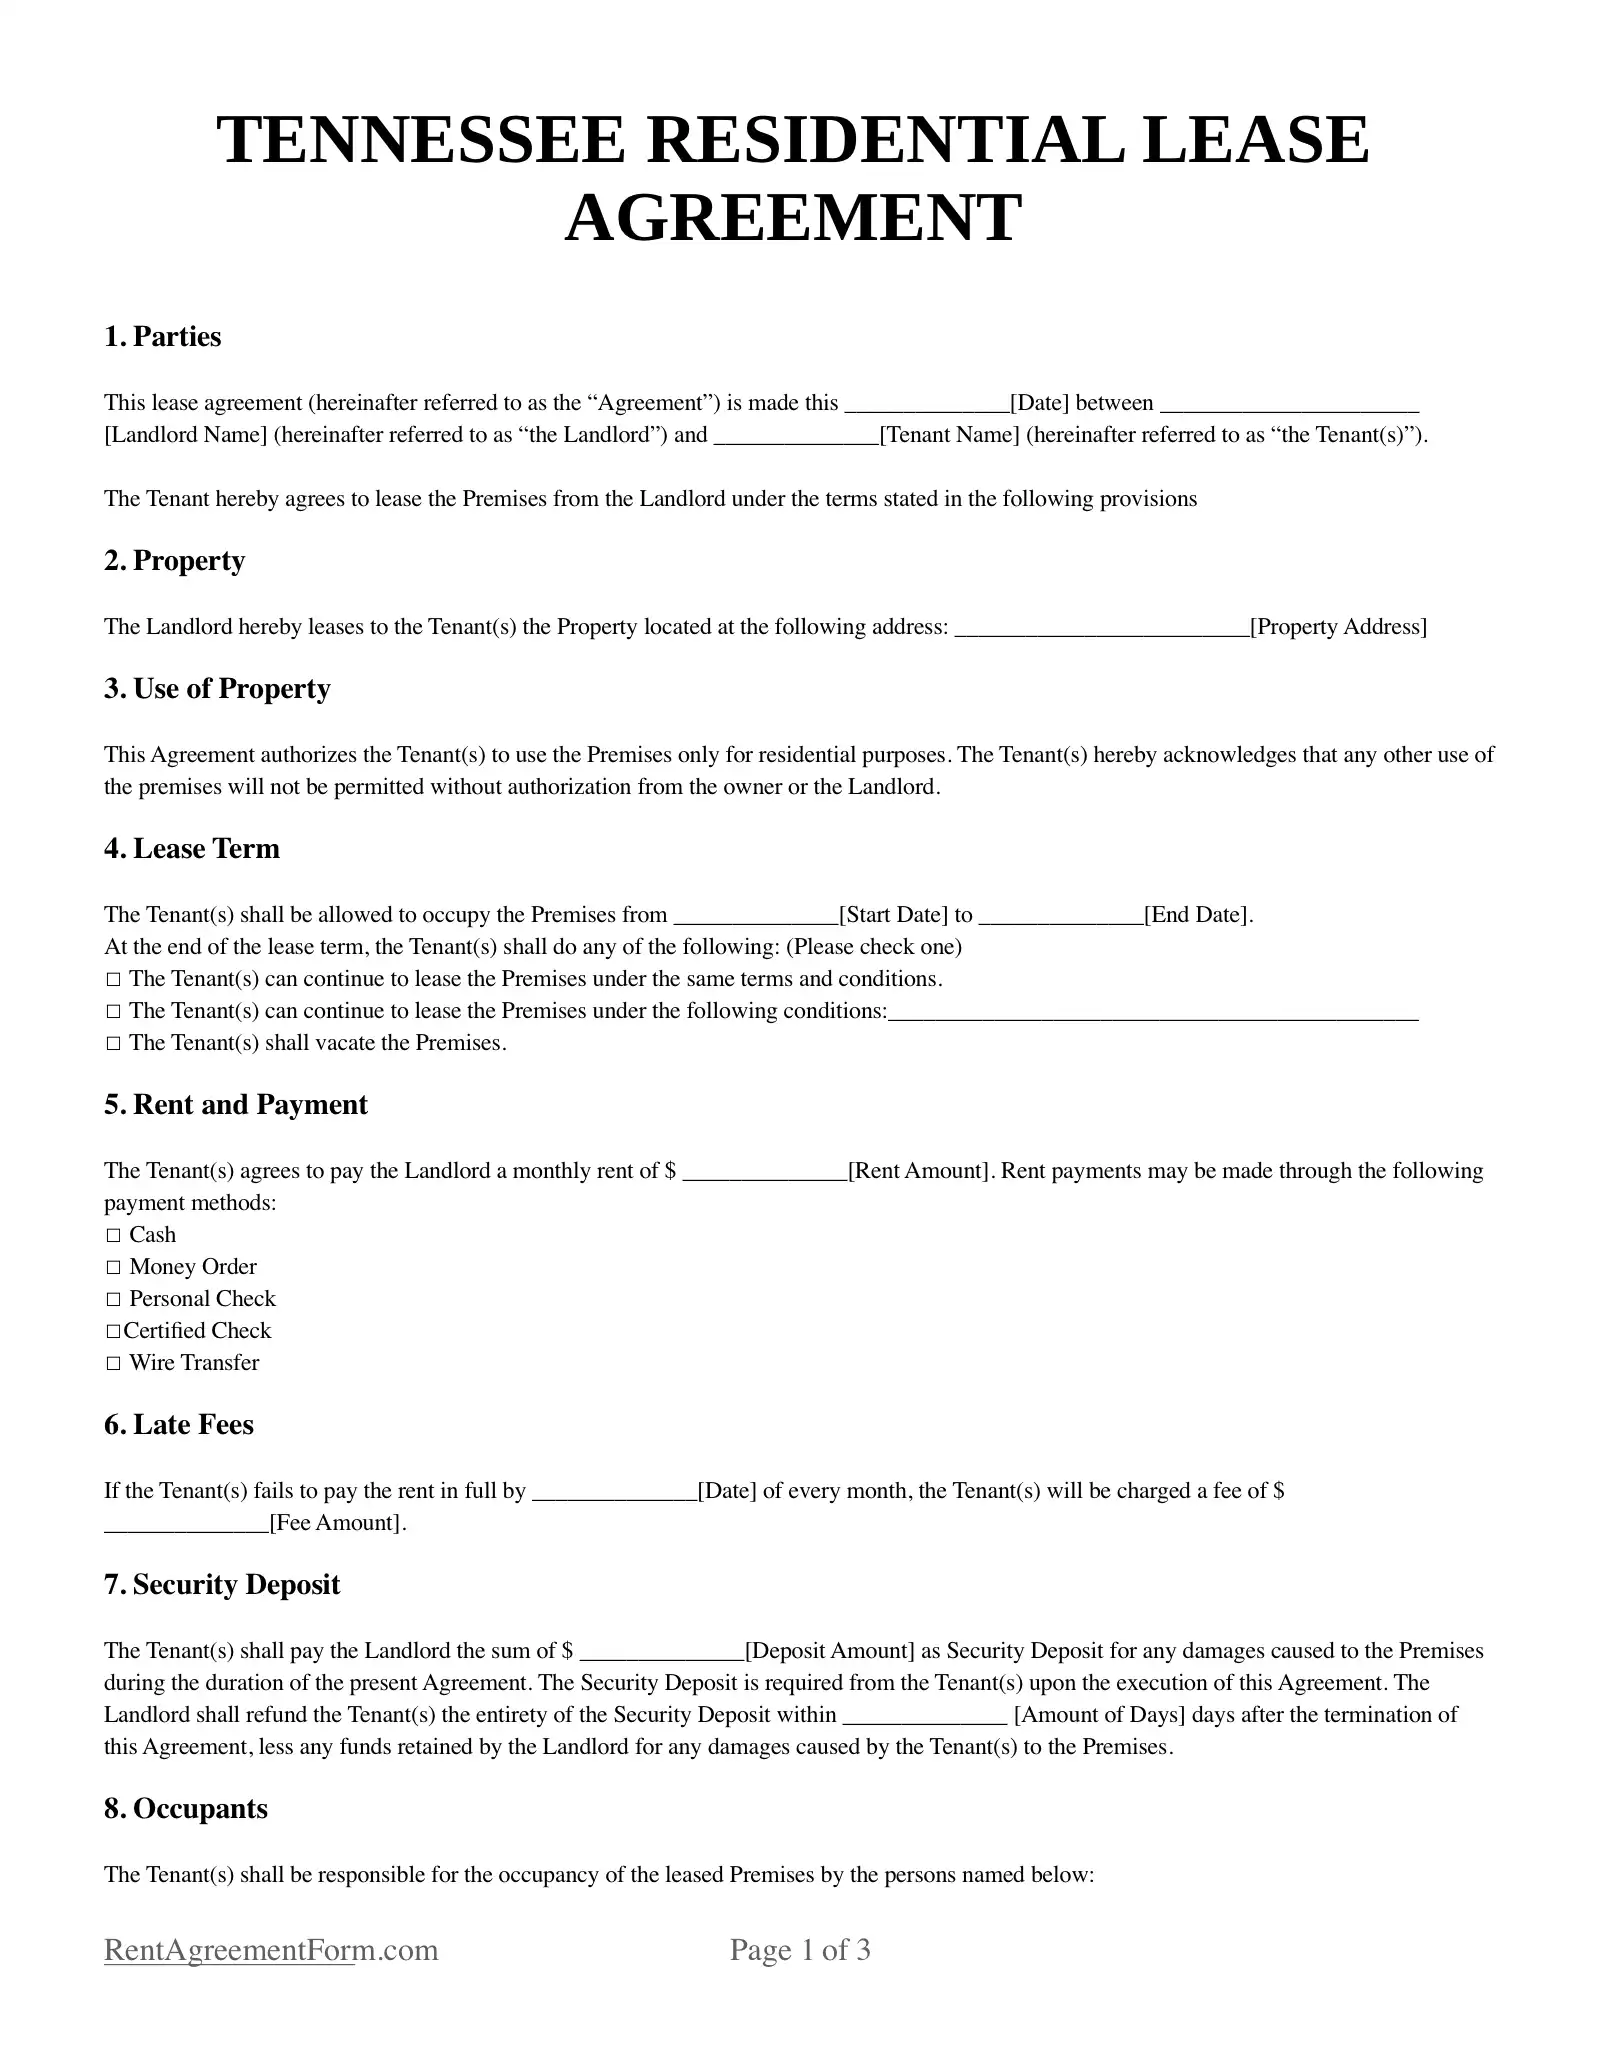 Tennessee Residential Lease Agreement Sample